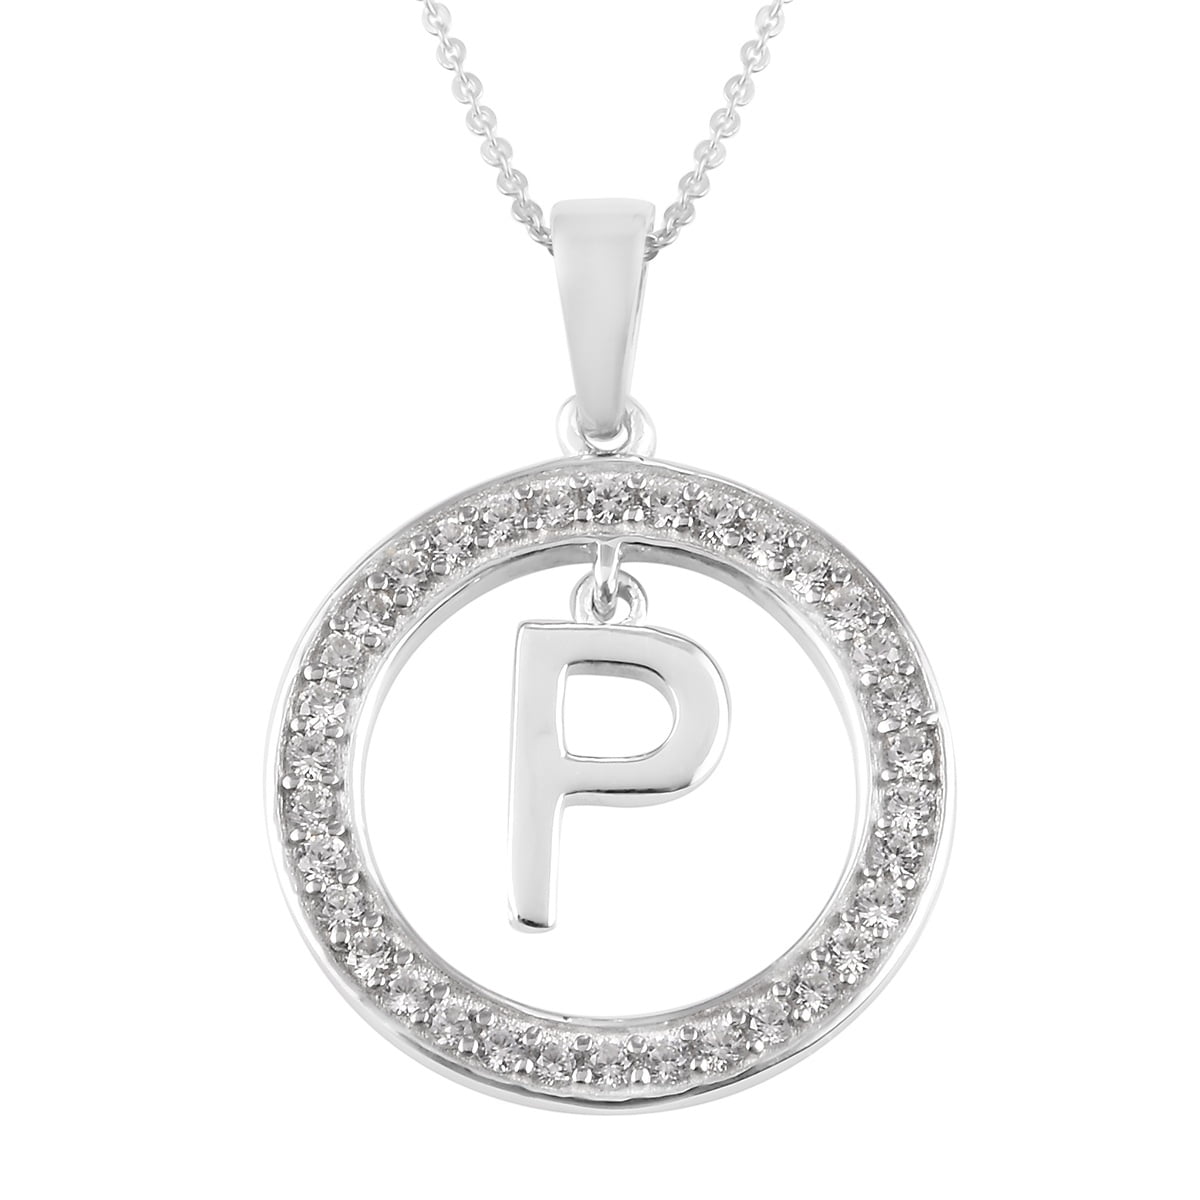 925 sterling silver necklace-zircon necklace-birthday gift-anniversary gift-